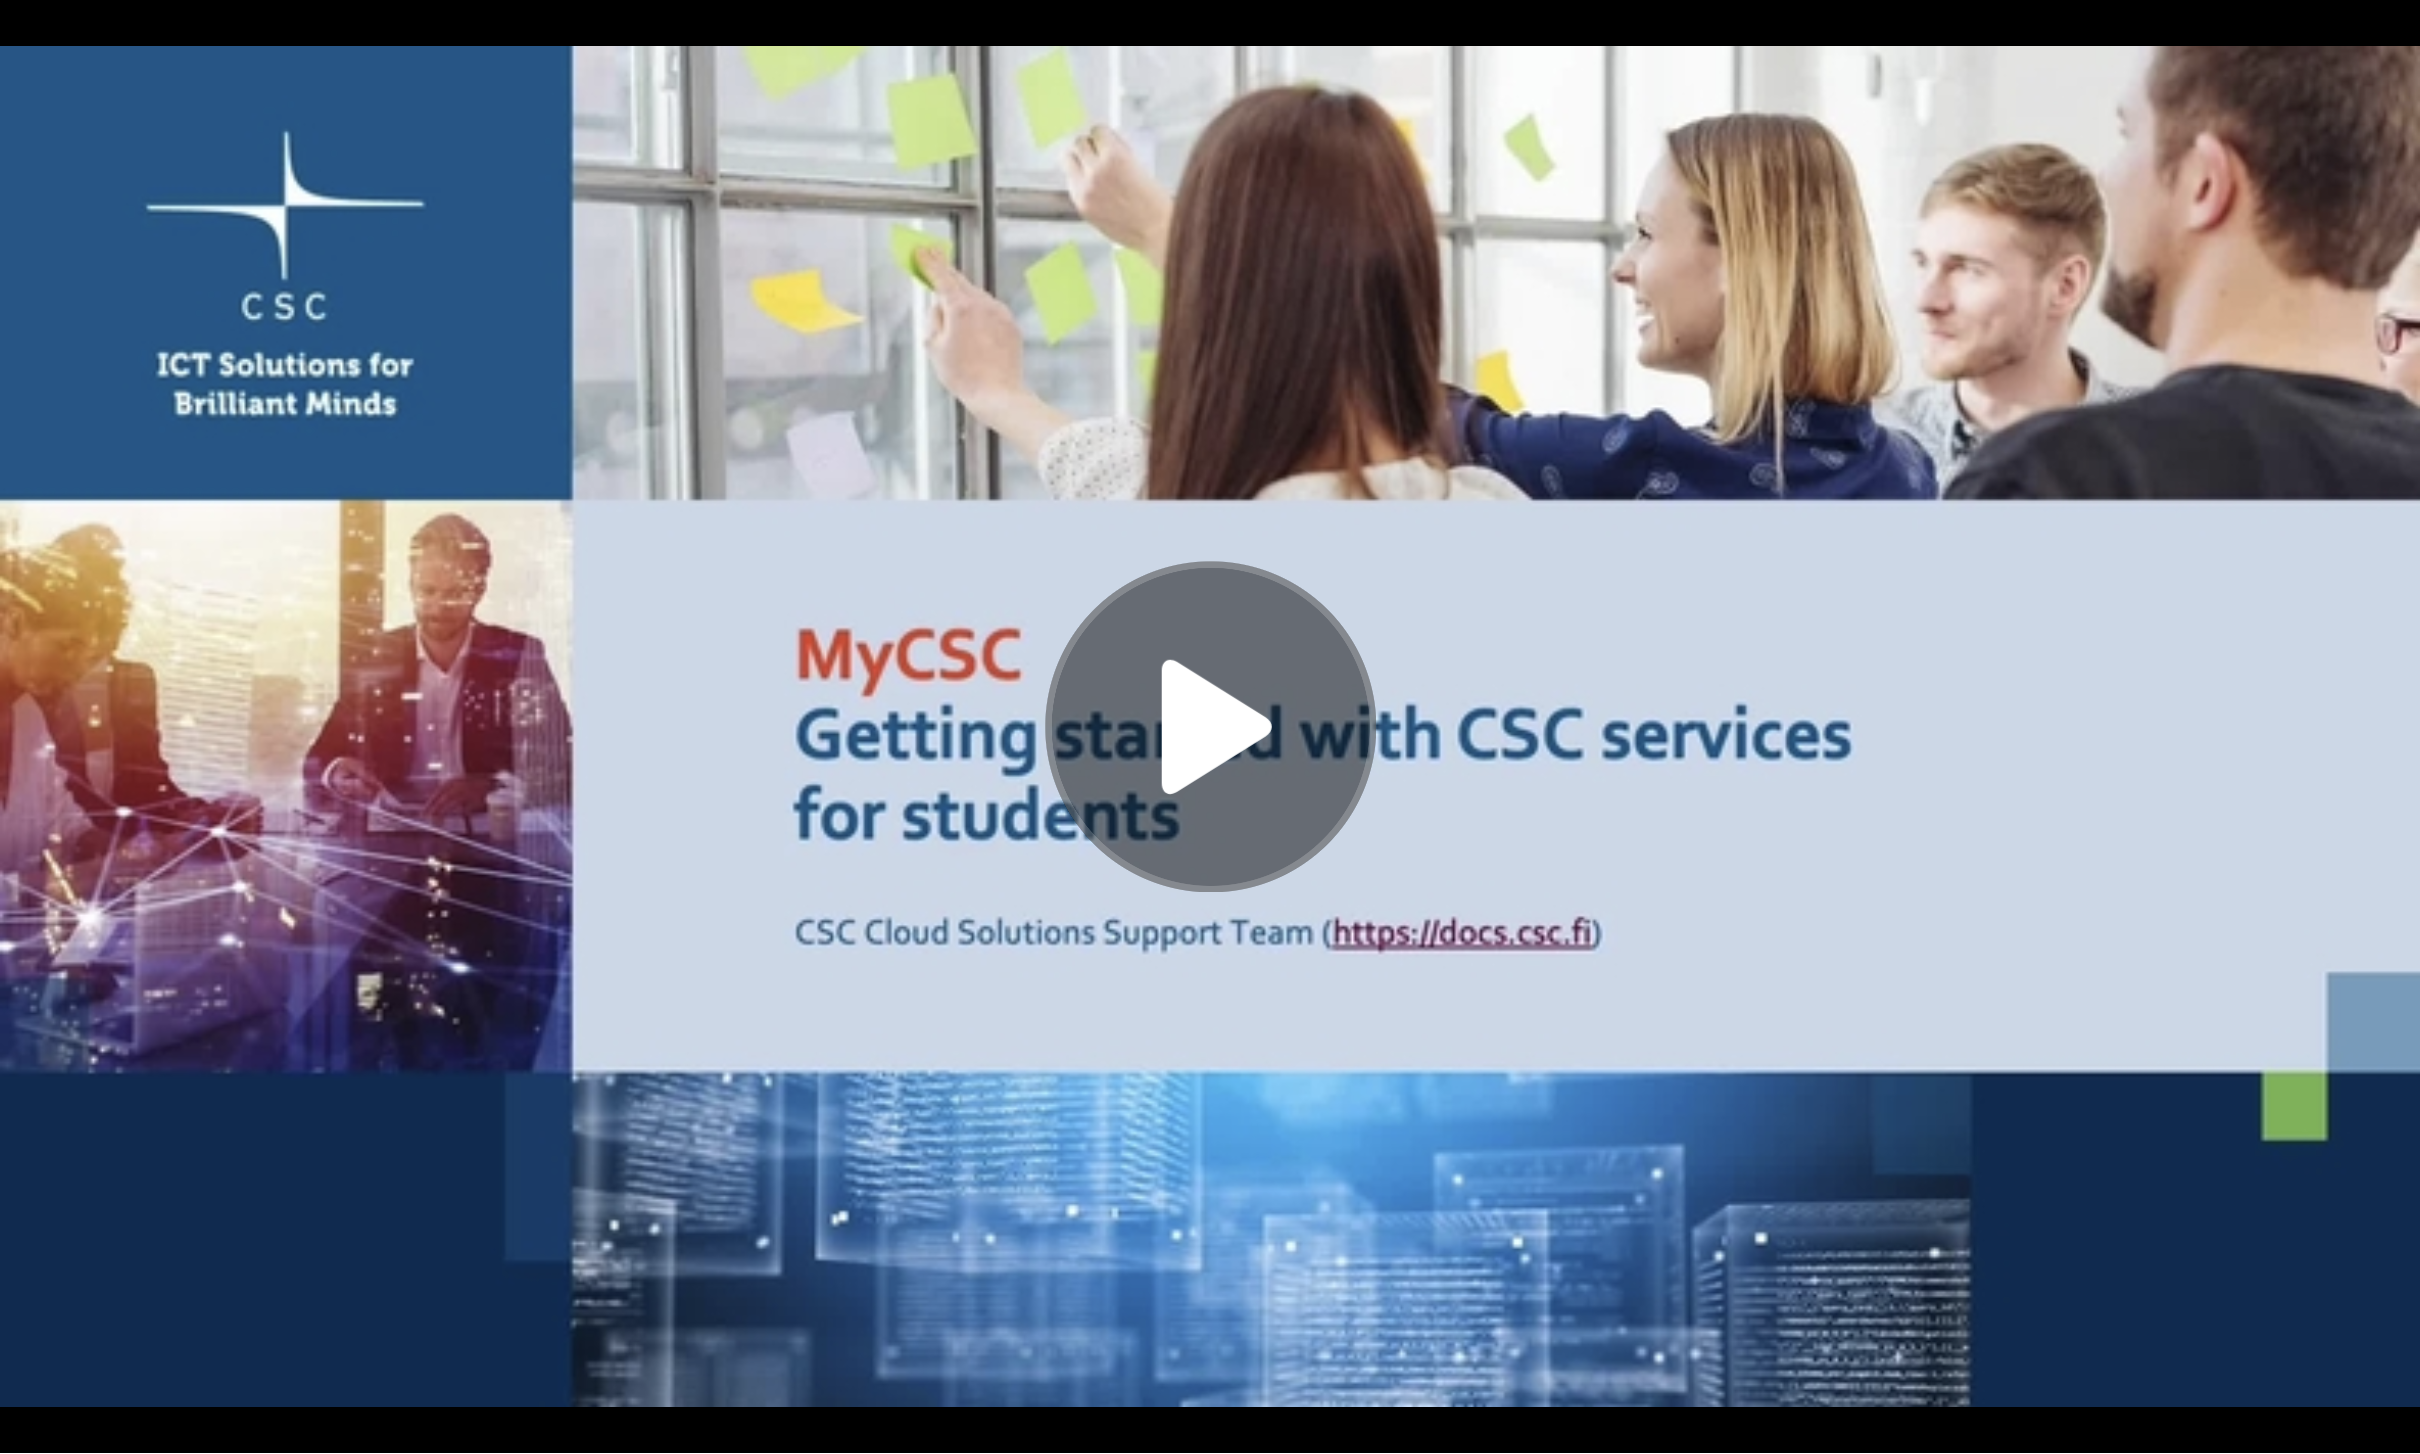 MyCSC - Getting started with CSC services for students